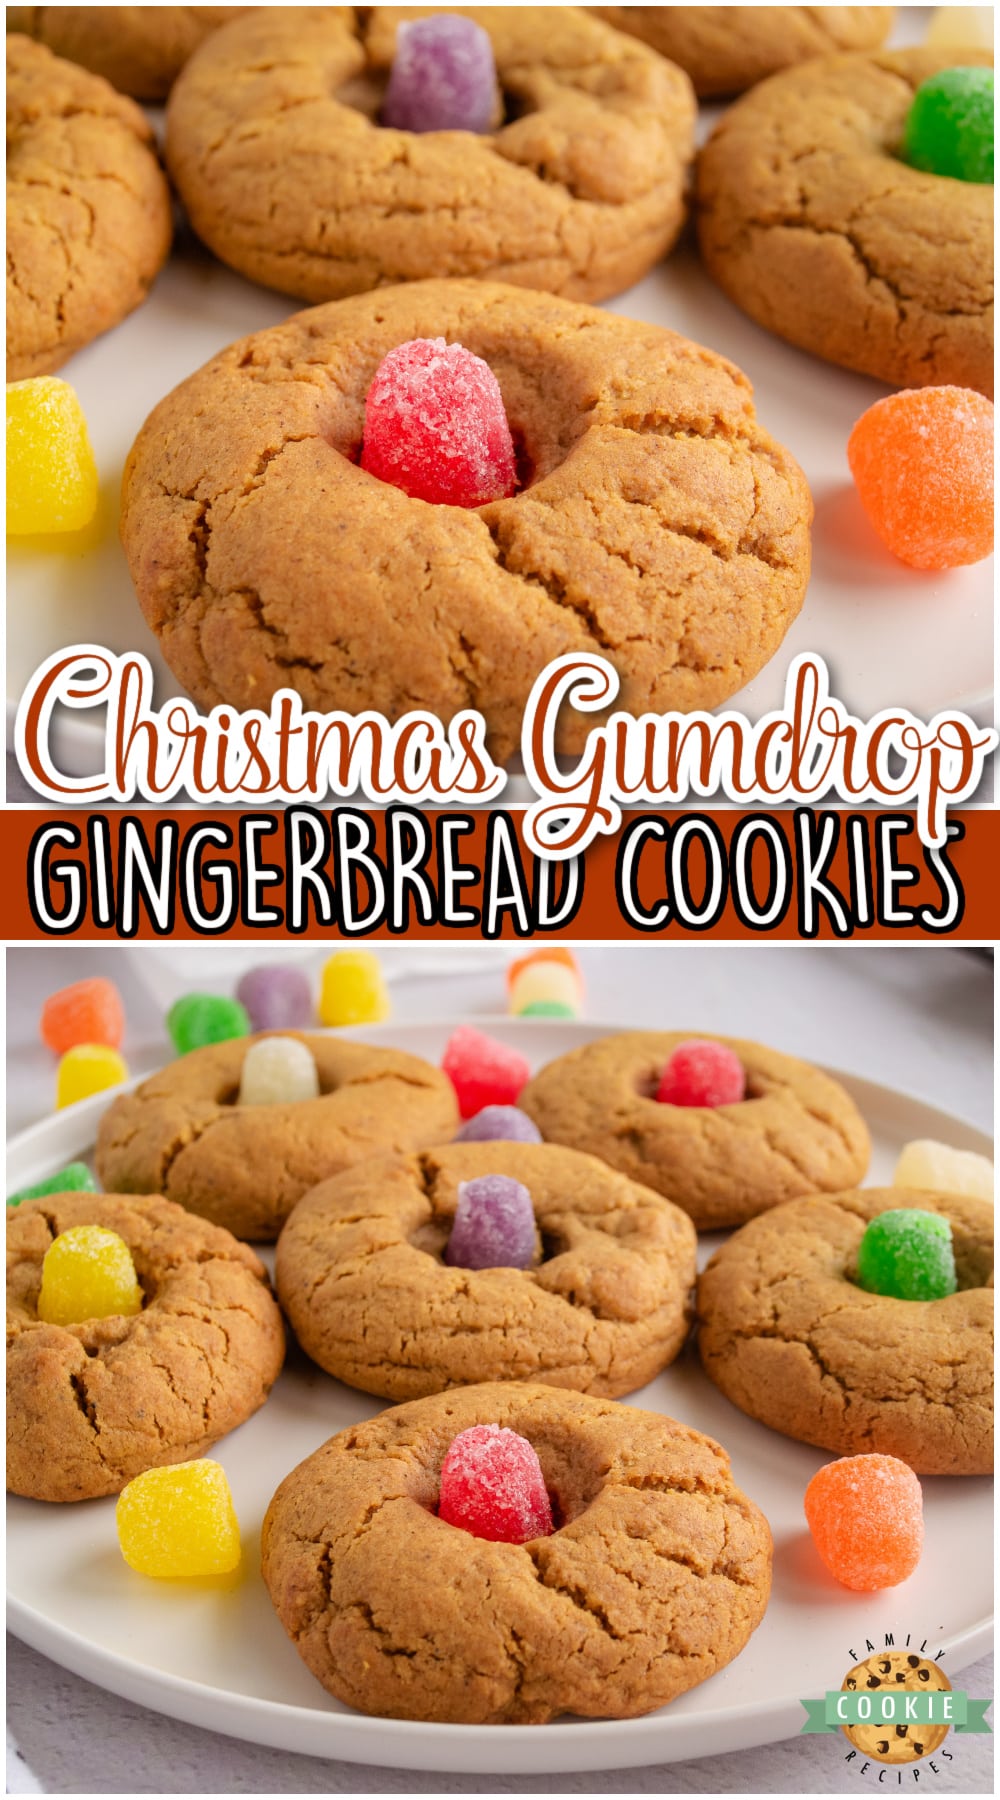 Gumdrop Gingerbread Cookies are a classic Christmas treat that everyone enjoys! These cookies with gumdrops are an easy way to enjoy gingerbread!